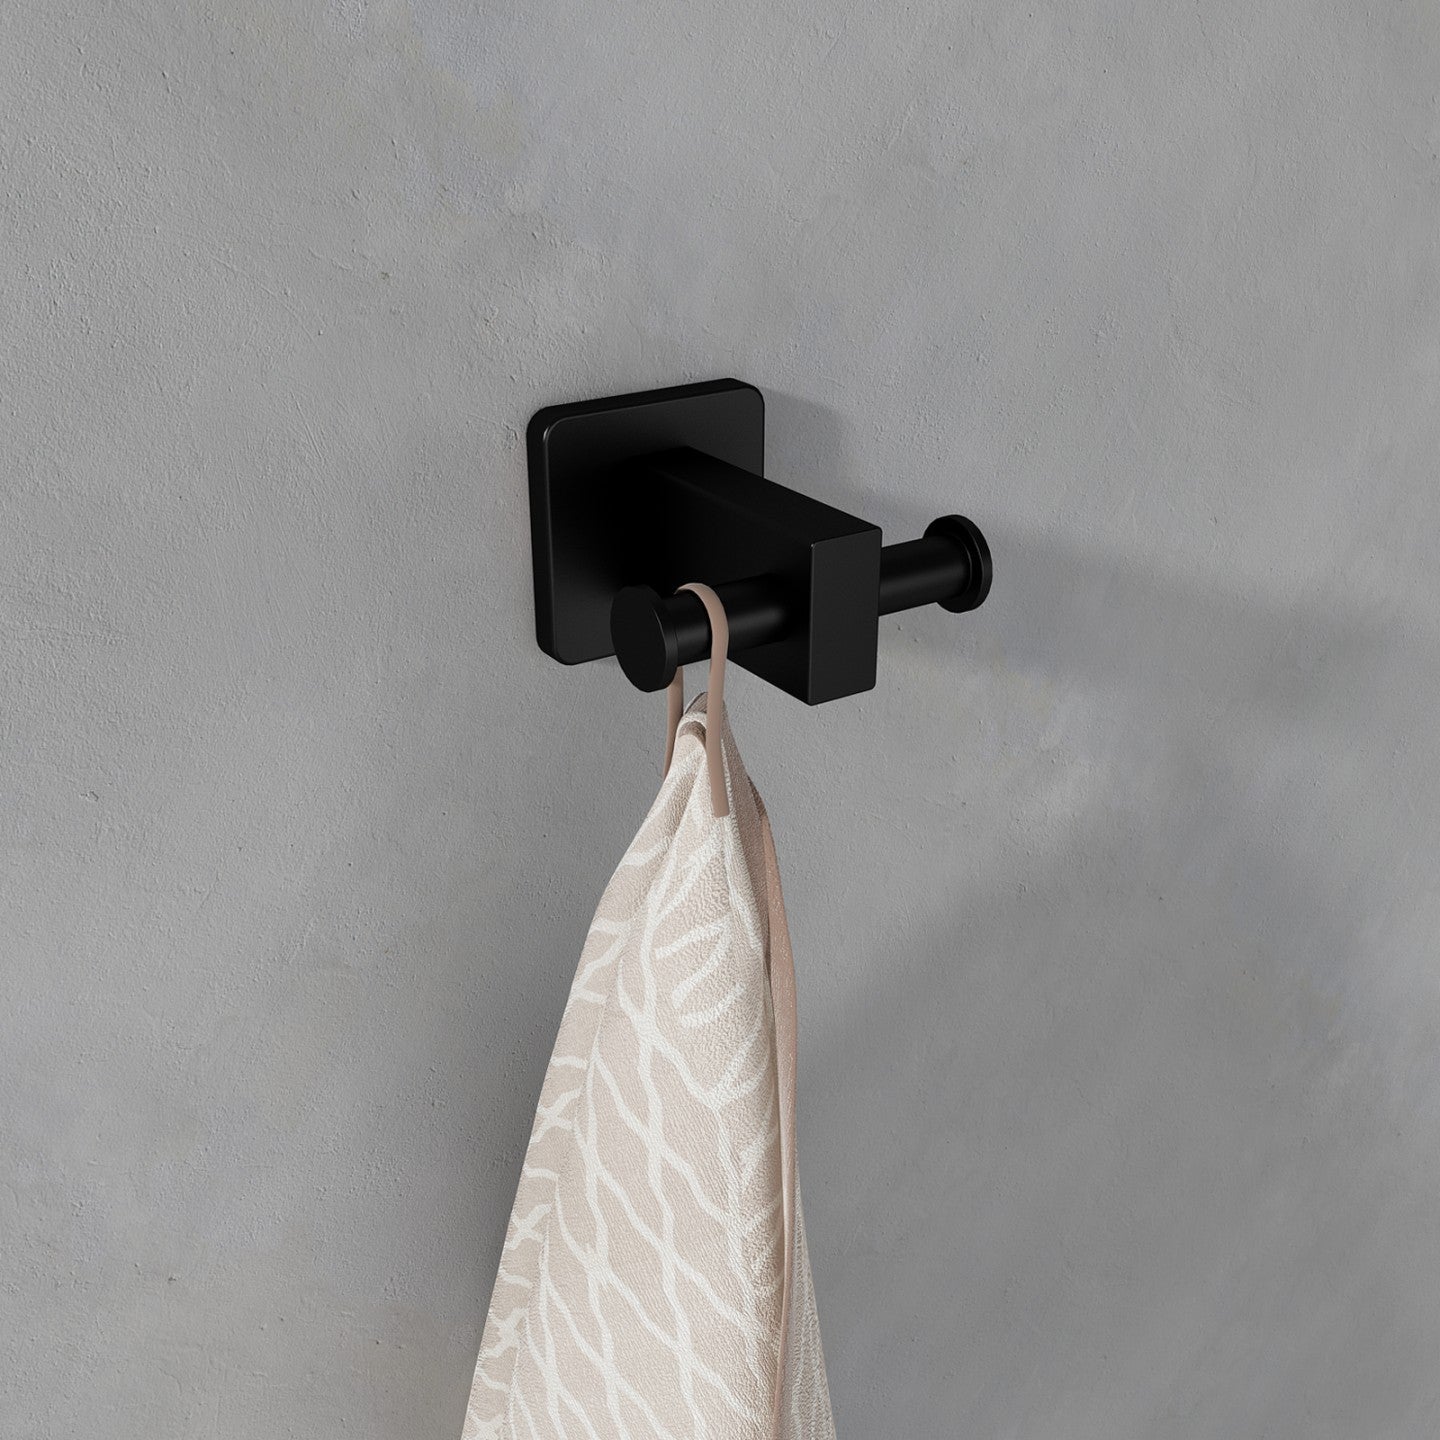 Modern black multipurpose hook acting as a towel bar and holder, providing a sleek and functional bathroom accessory